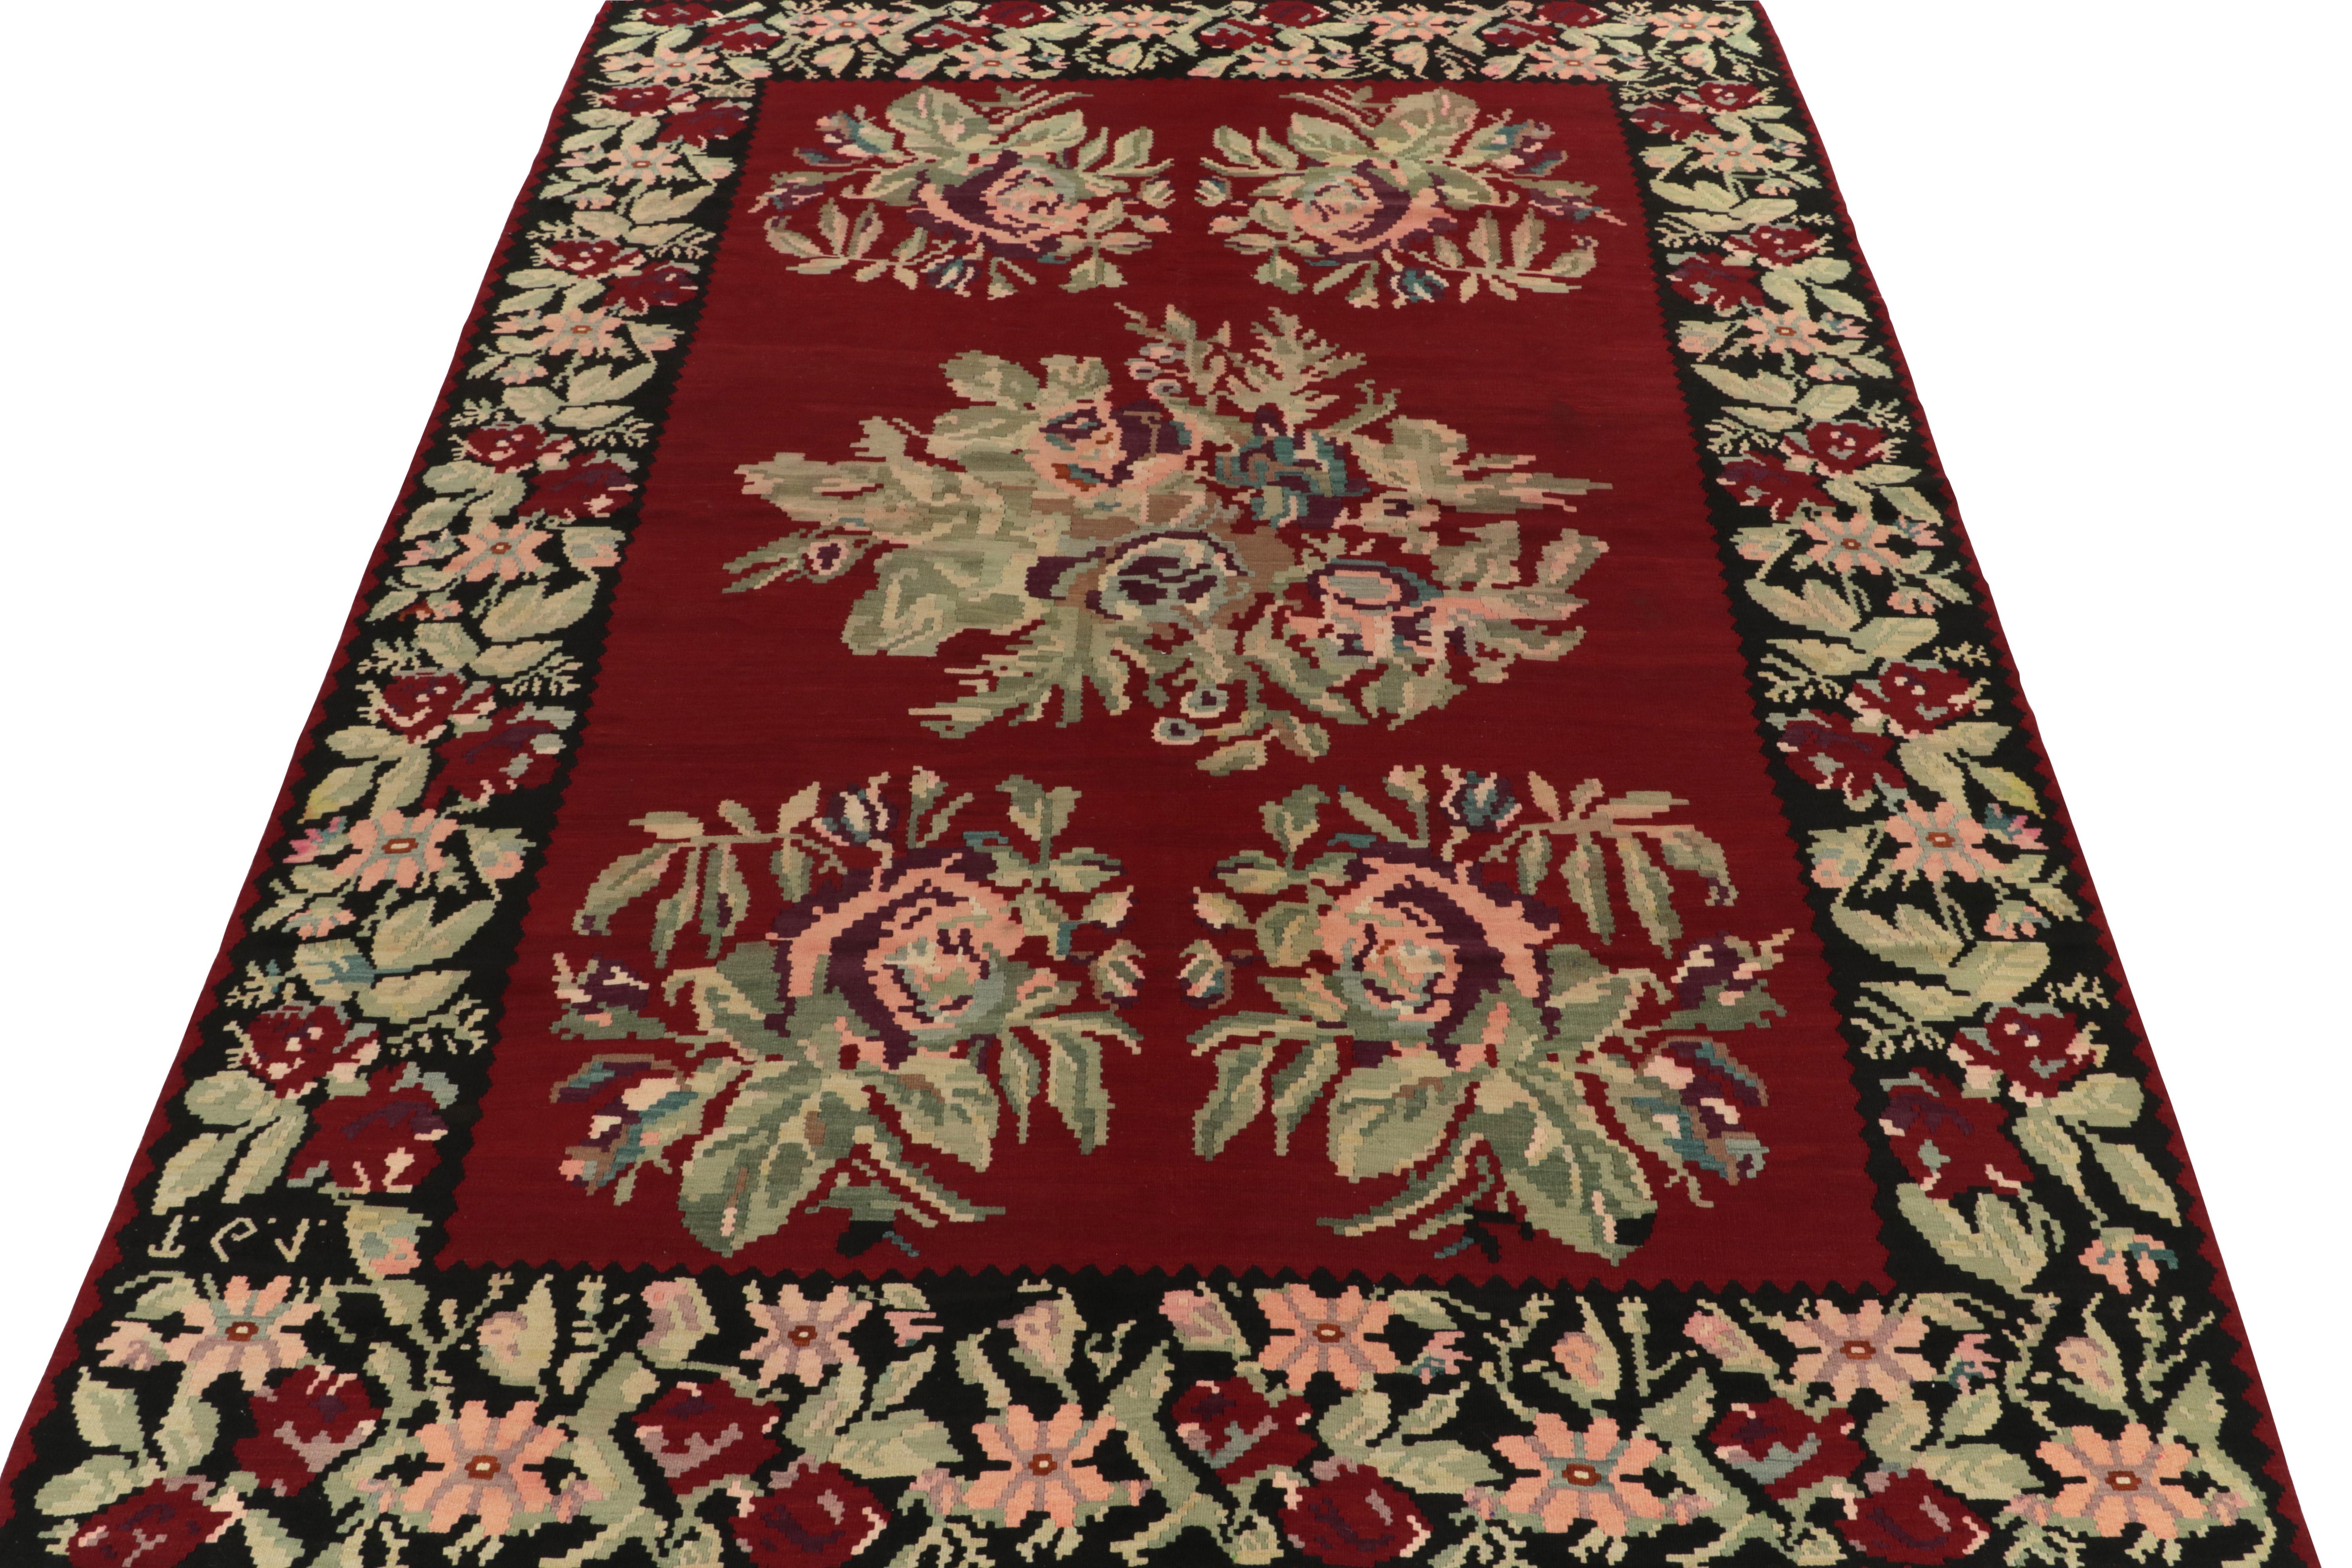 Turkish Vintage Bessarabian Kilim in Red with Green Pink Floral Pattern by Rug & Kilim For Sale